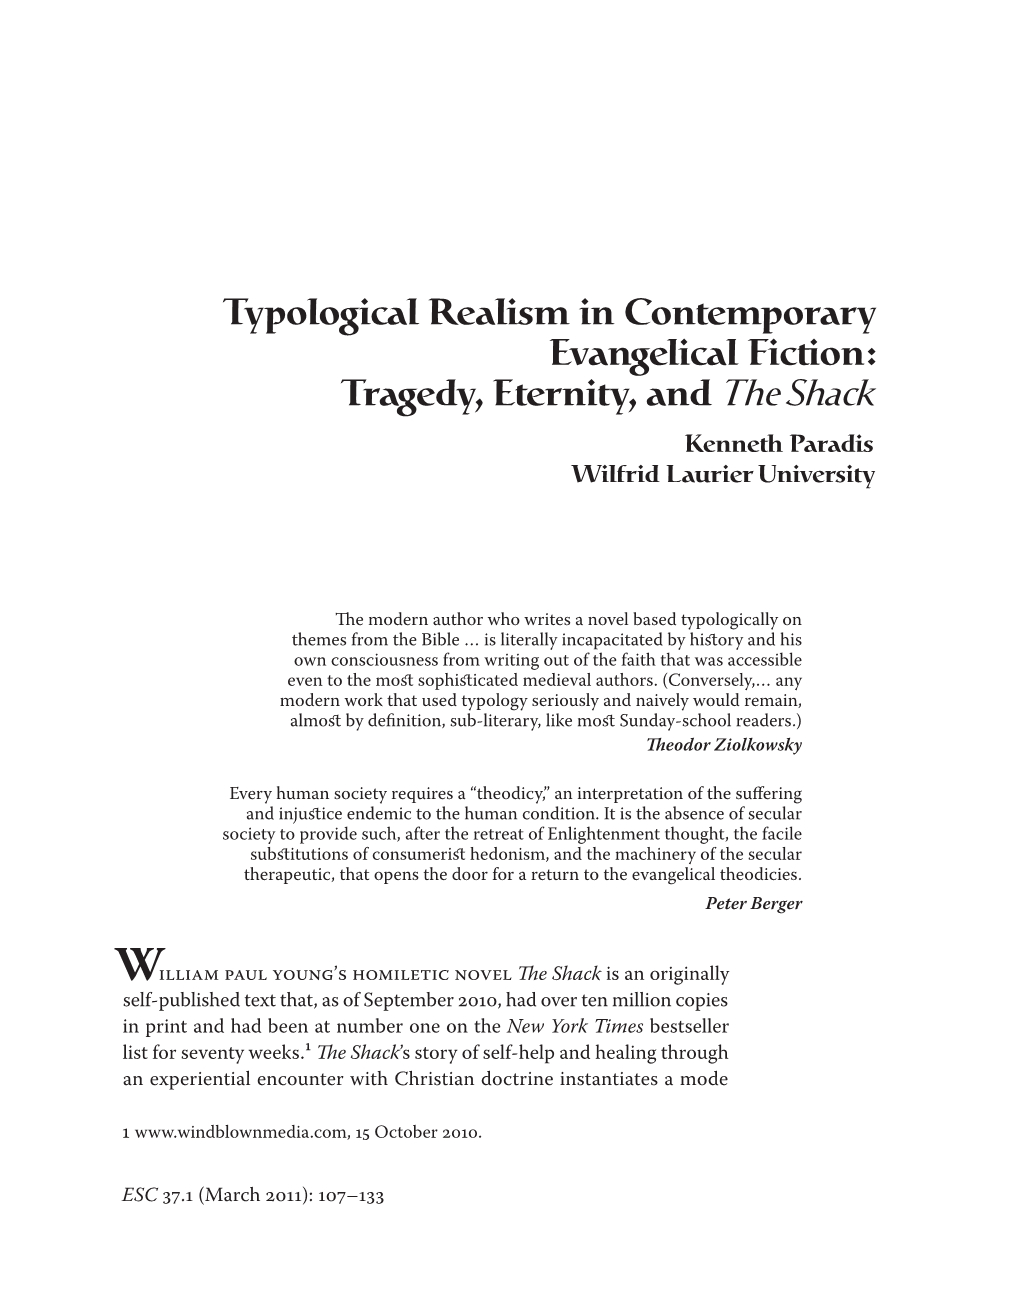 Typological Realism in Contemporary Evangelical Fiction: Tragedy, Eternity, and the Shack Kenneth Paradis Wilfrid Laurier University